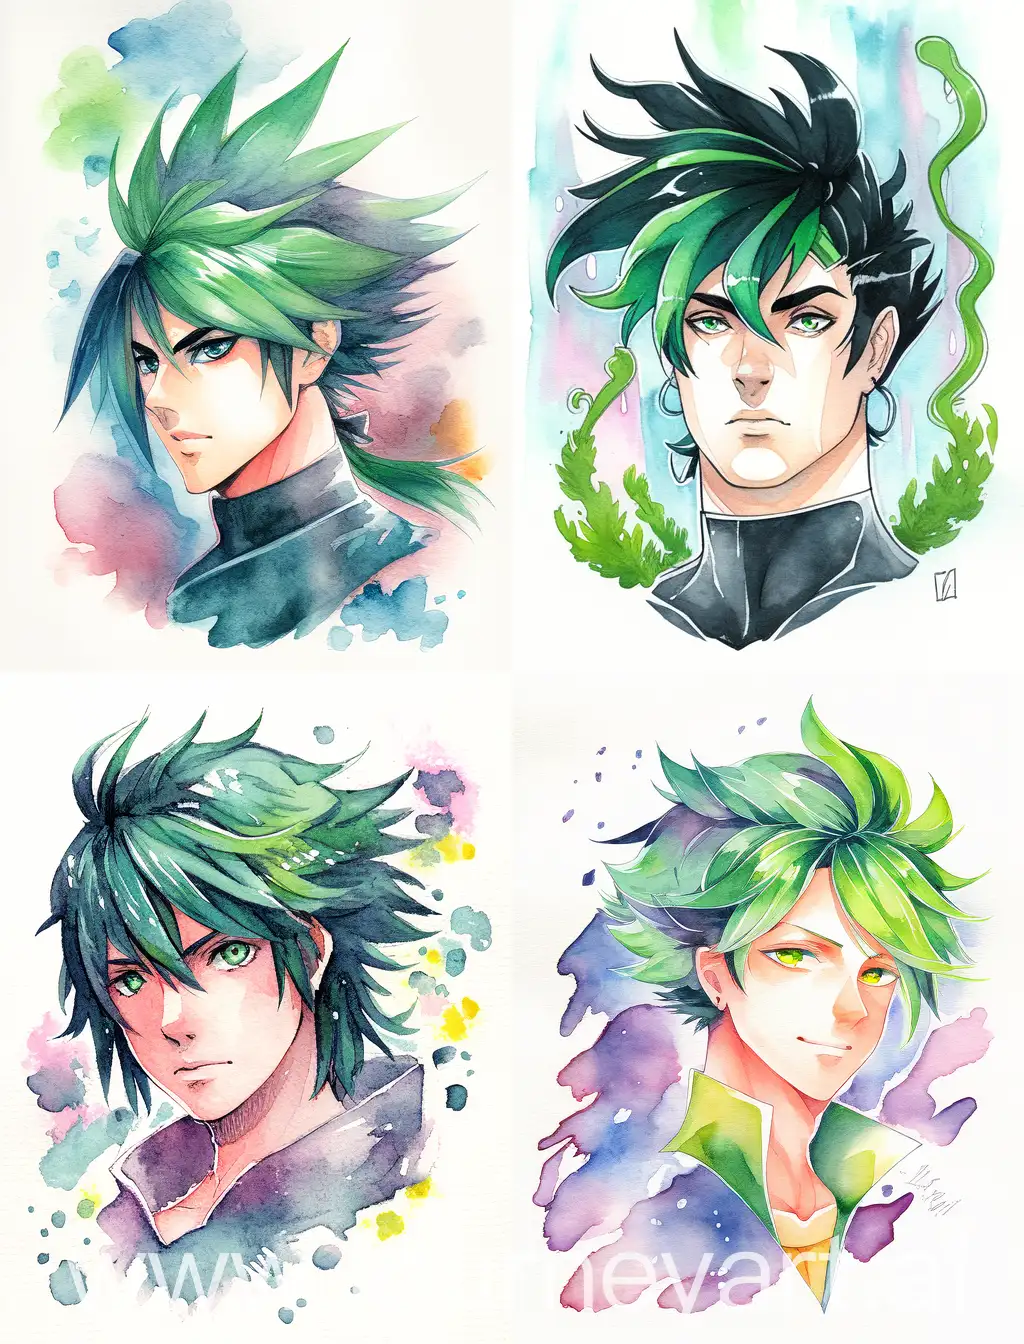 Male portrait with black and green hair of a man from Uranus, watercolor with a colorful bright background- niji 6